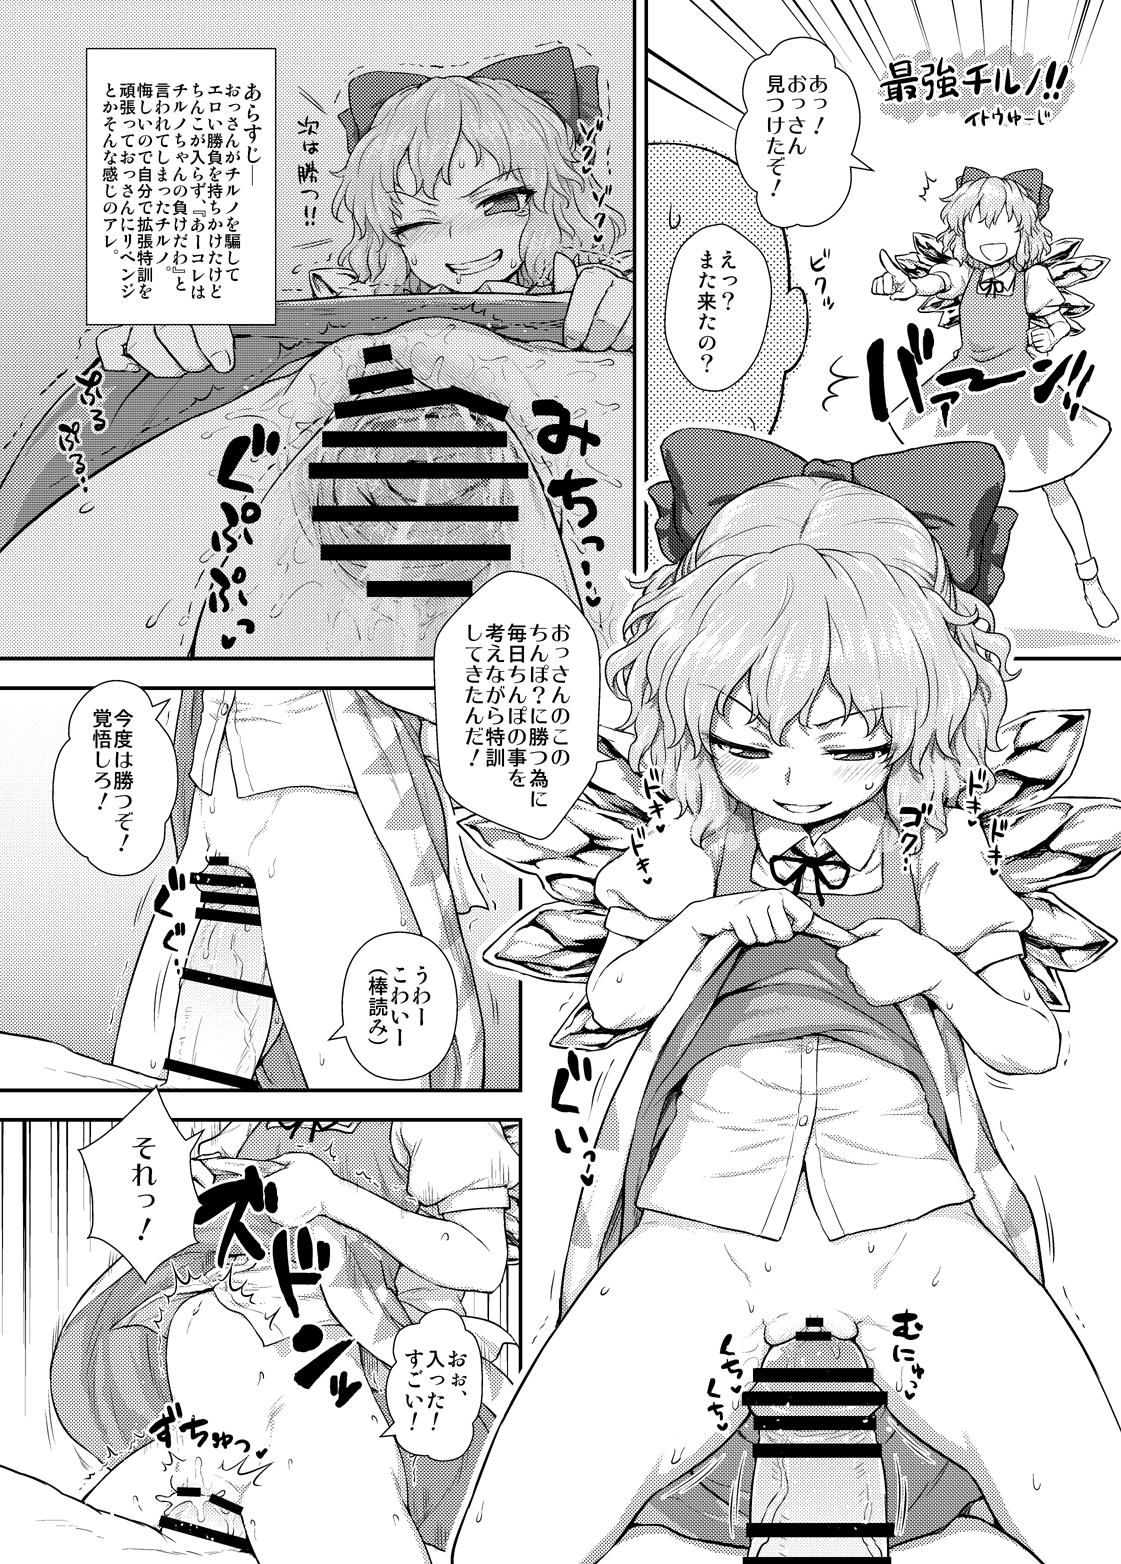 Trap 『東方子宮脱合同誌』 - Touhou project Huge Cock - Page 1